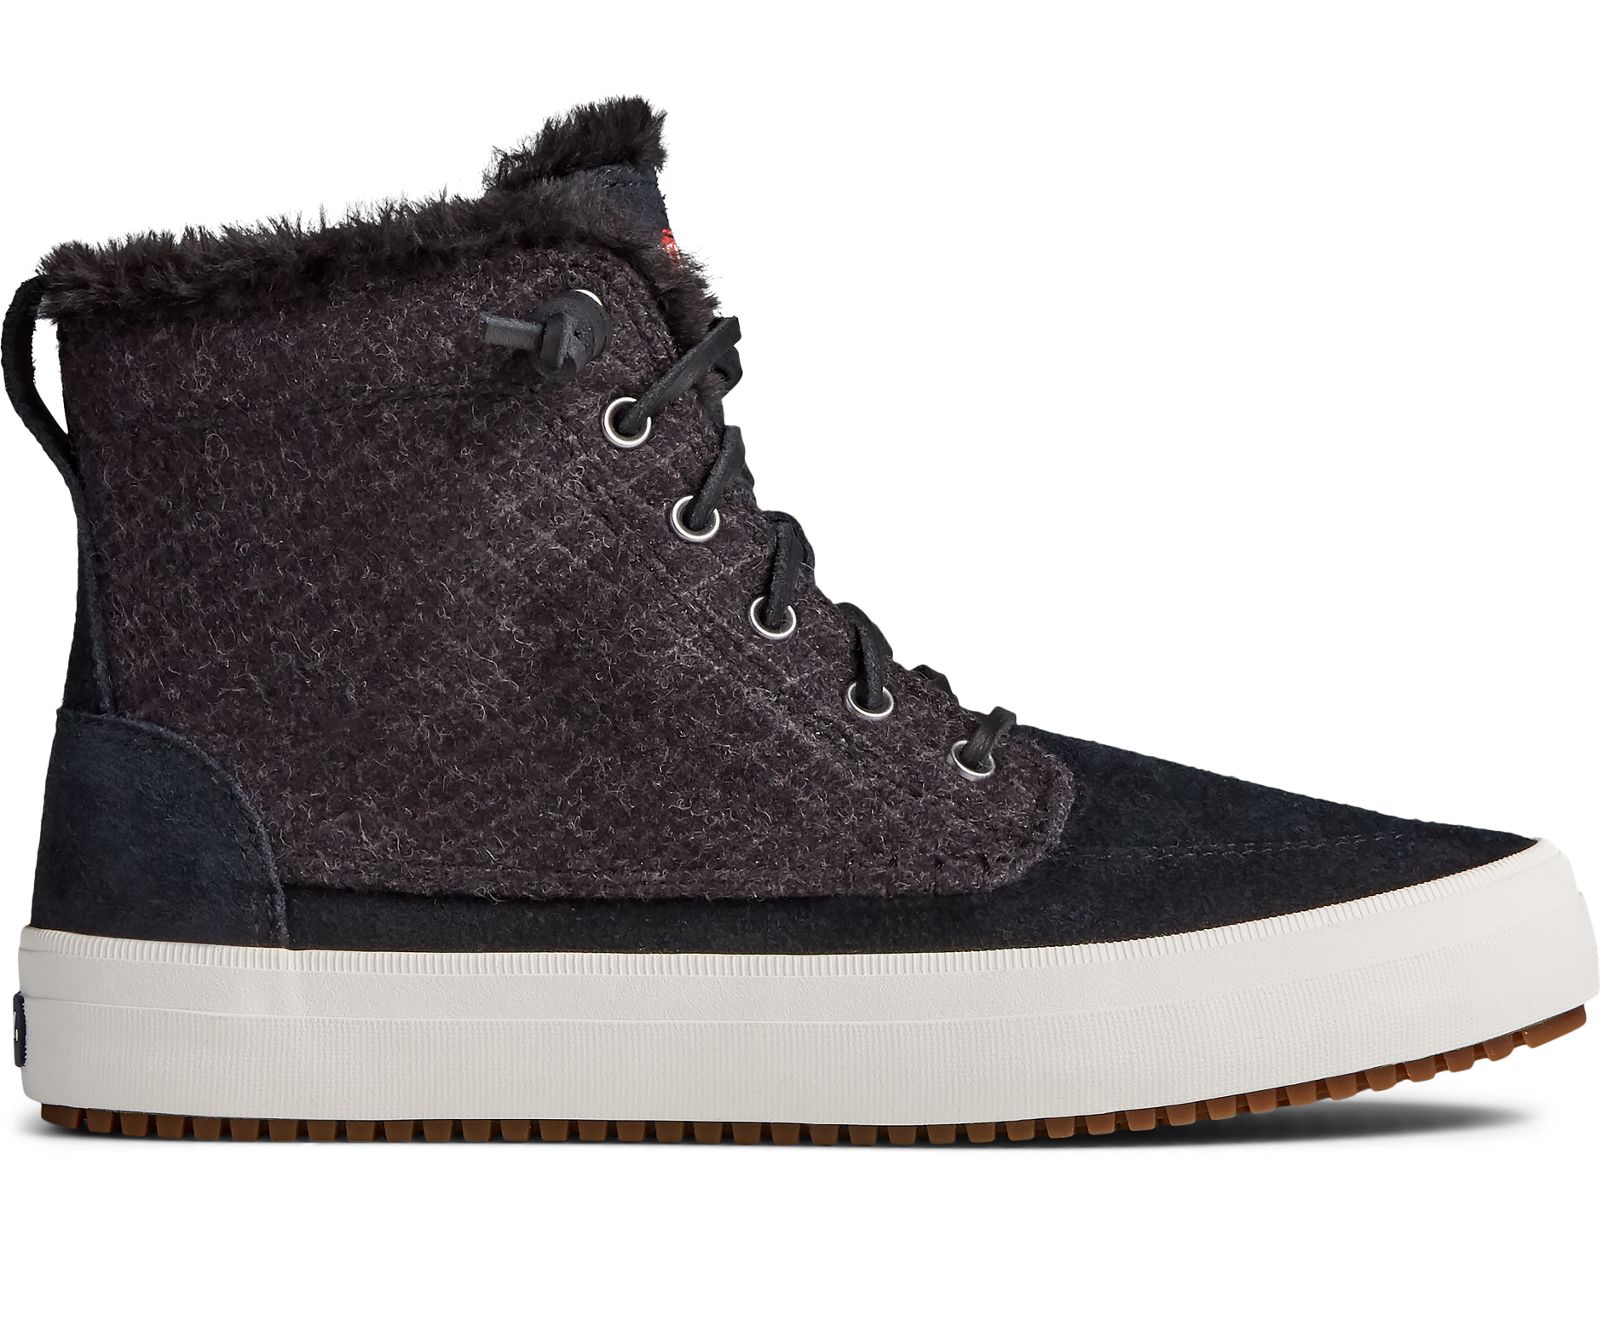 Women's Crest Lug High Top Quilted Suede Boot - Boots | Sperry